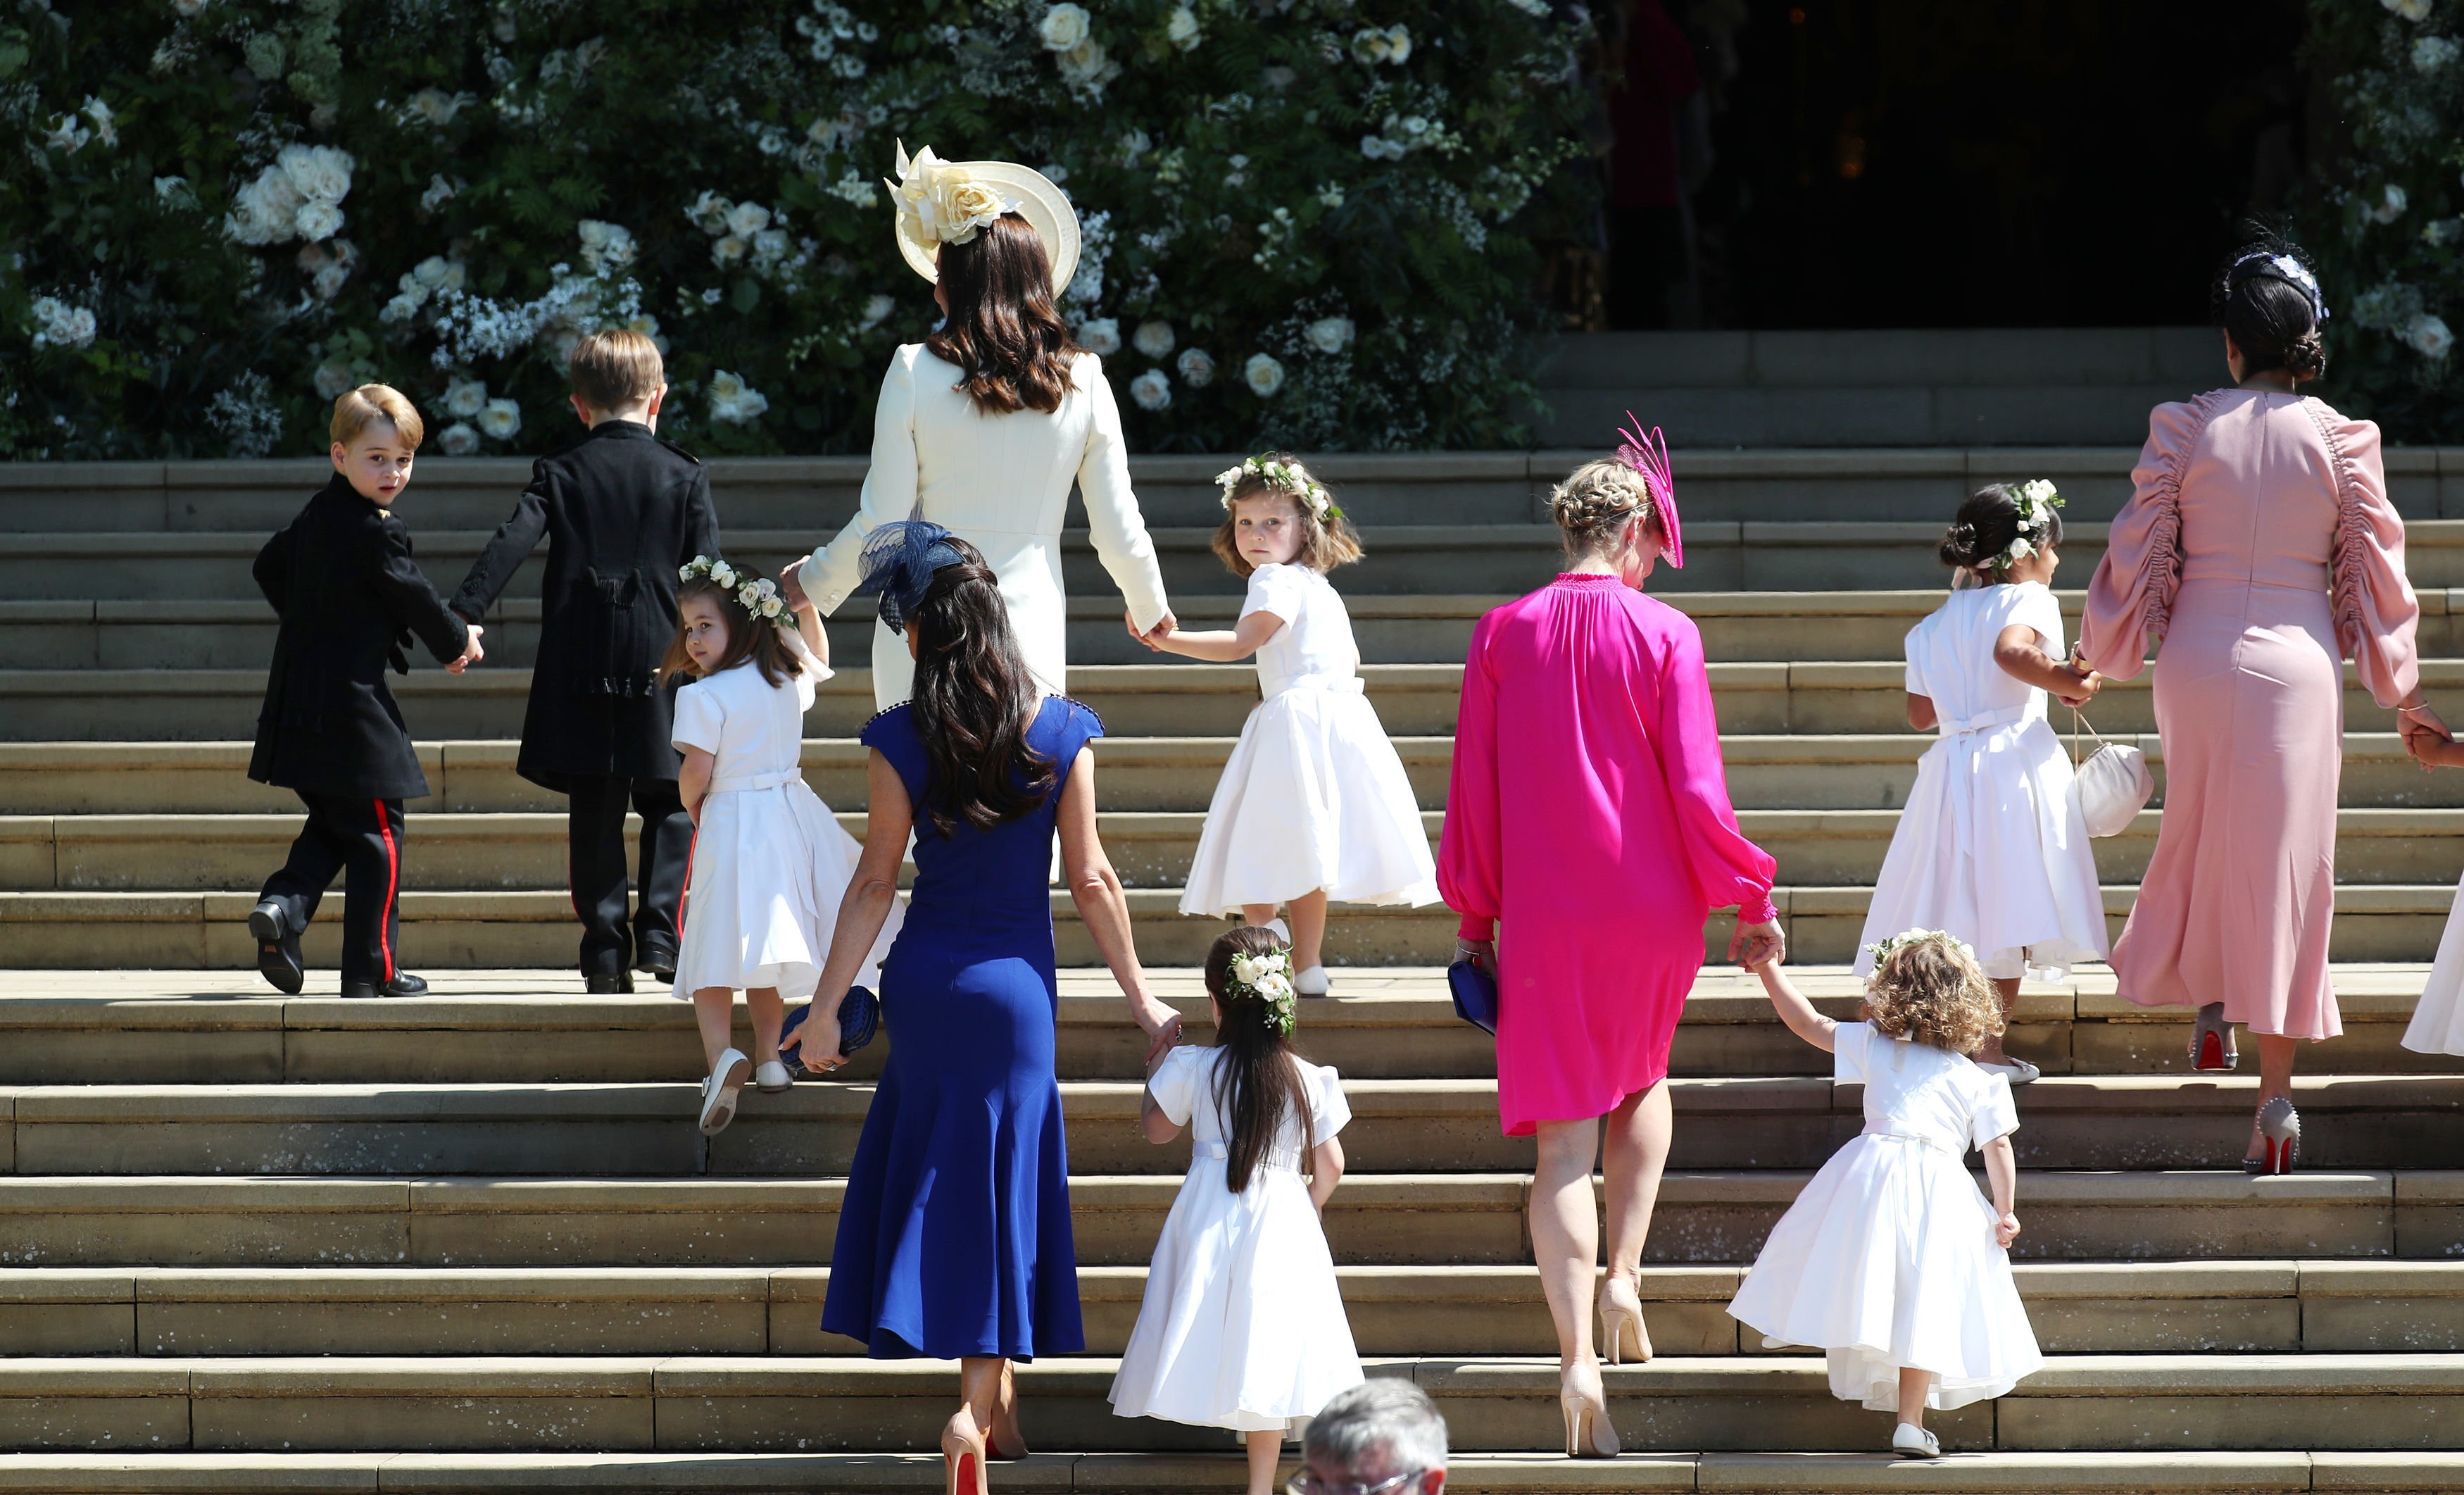 Catherine, Duchess of Cambridge, Jessica Mulroney,  Zalie Warren, and the other bridesmaids and pages arrive at St George's Chapel at Windsor Castle for the wedding of Prince Harry and Meghan Markle | Photo: GettyImages